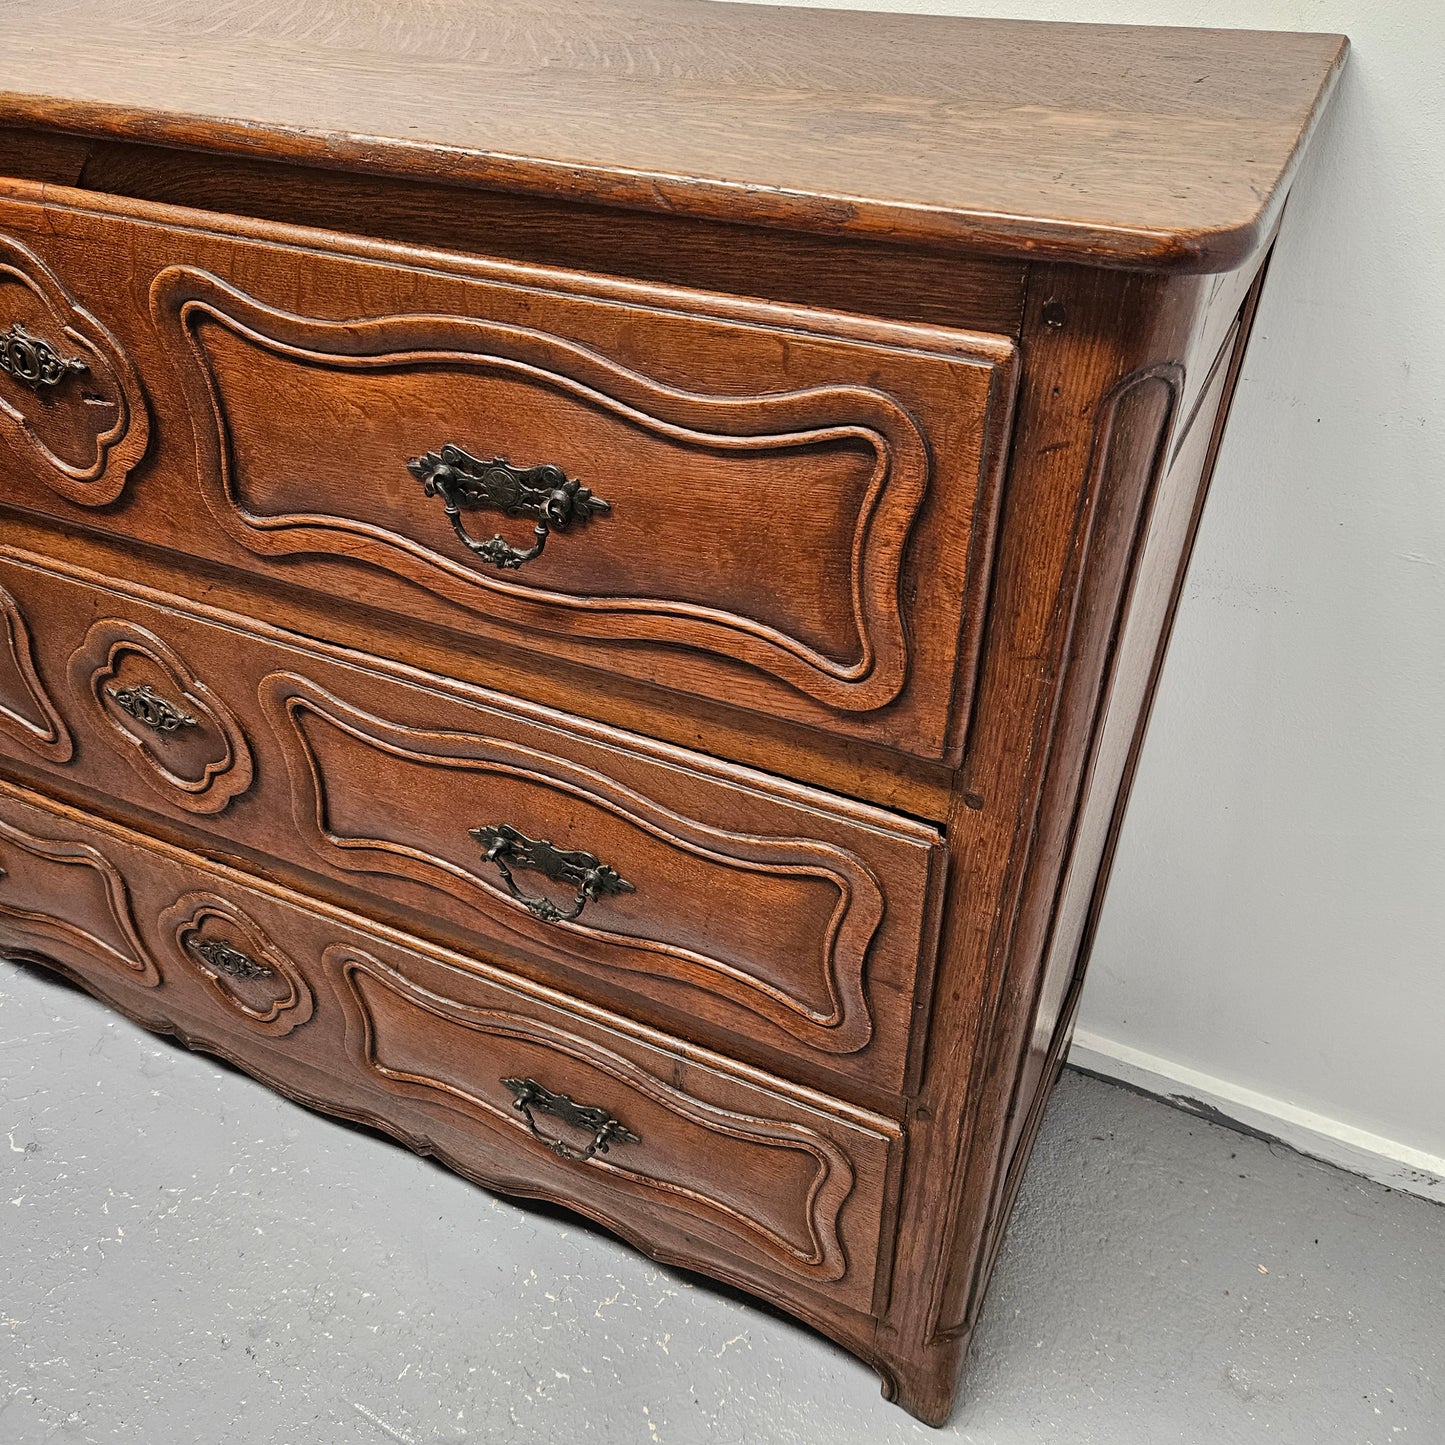 Rare Early 19th Century Narrow French Oak Wooden Top Commode